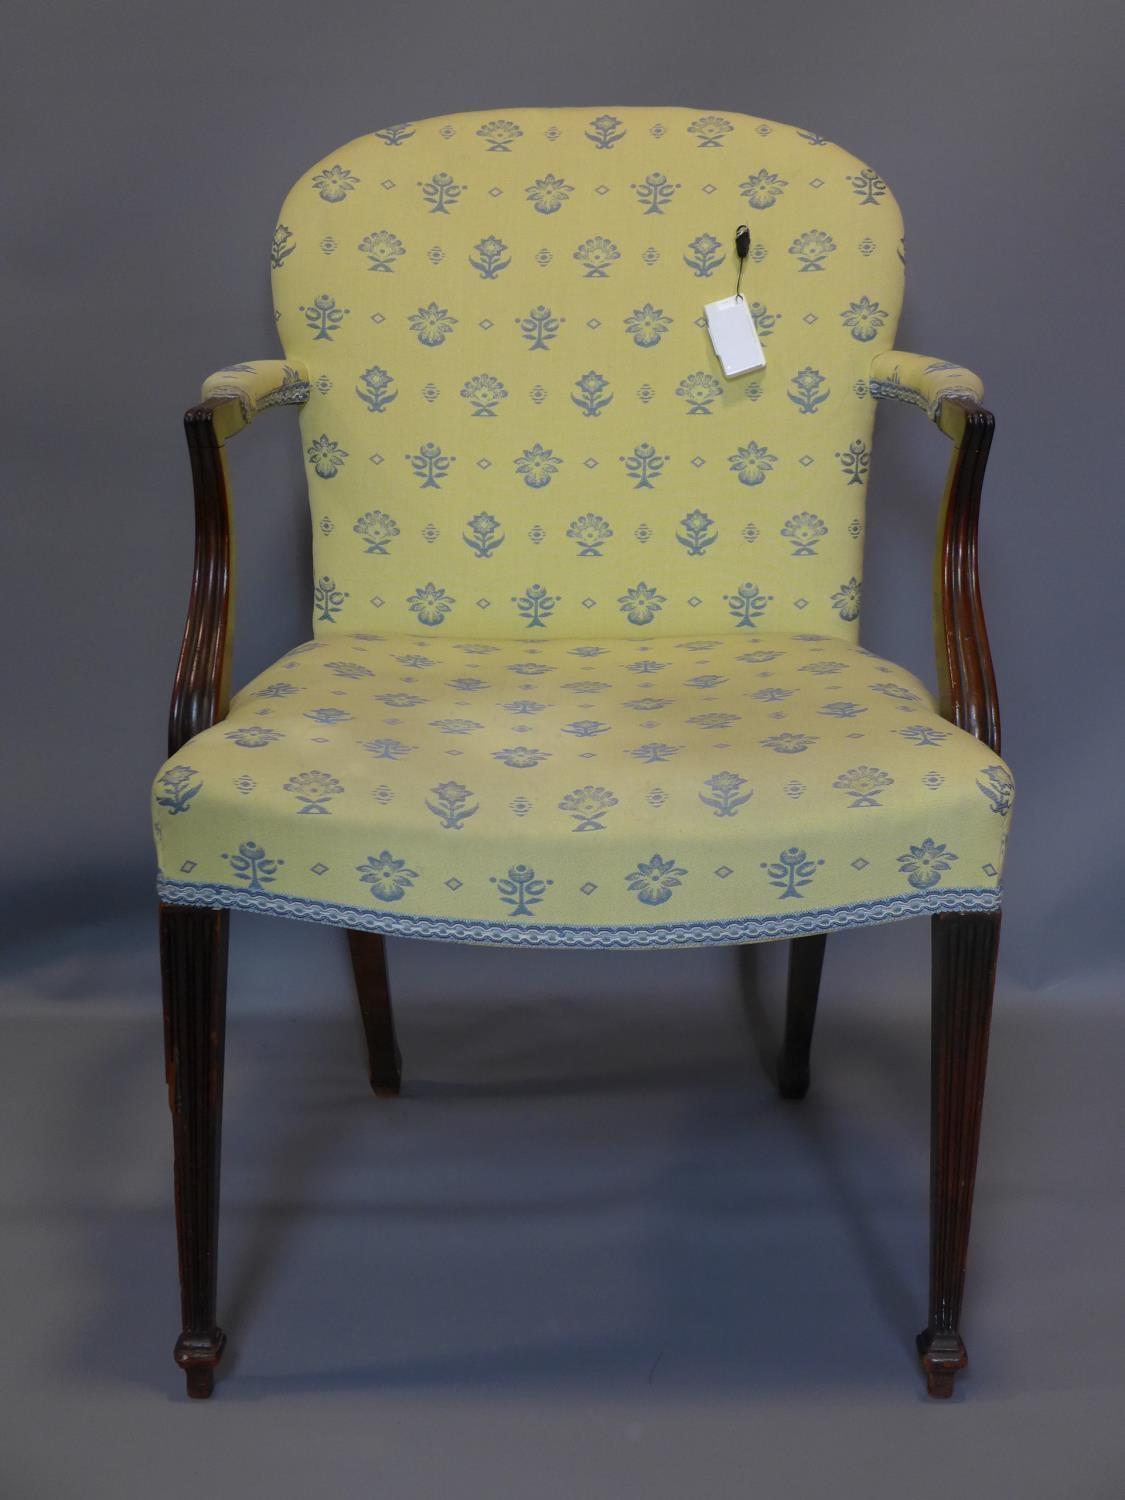 An Edwardian Sheraton Revival armchair with reeded tapering legs